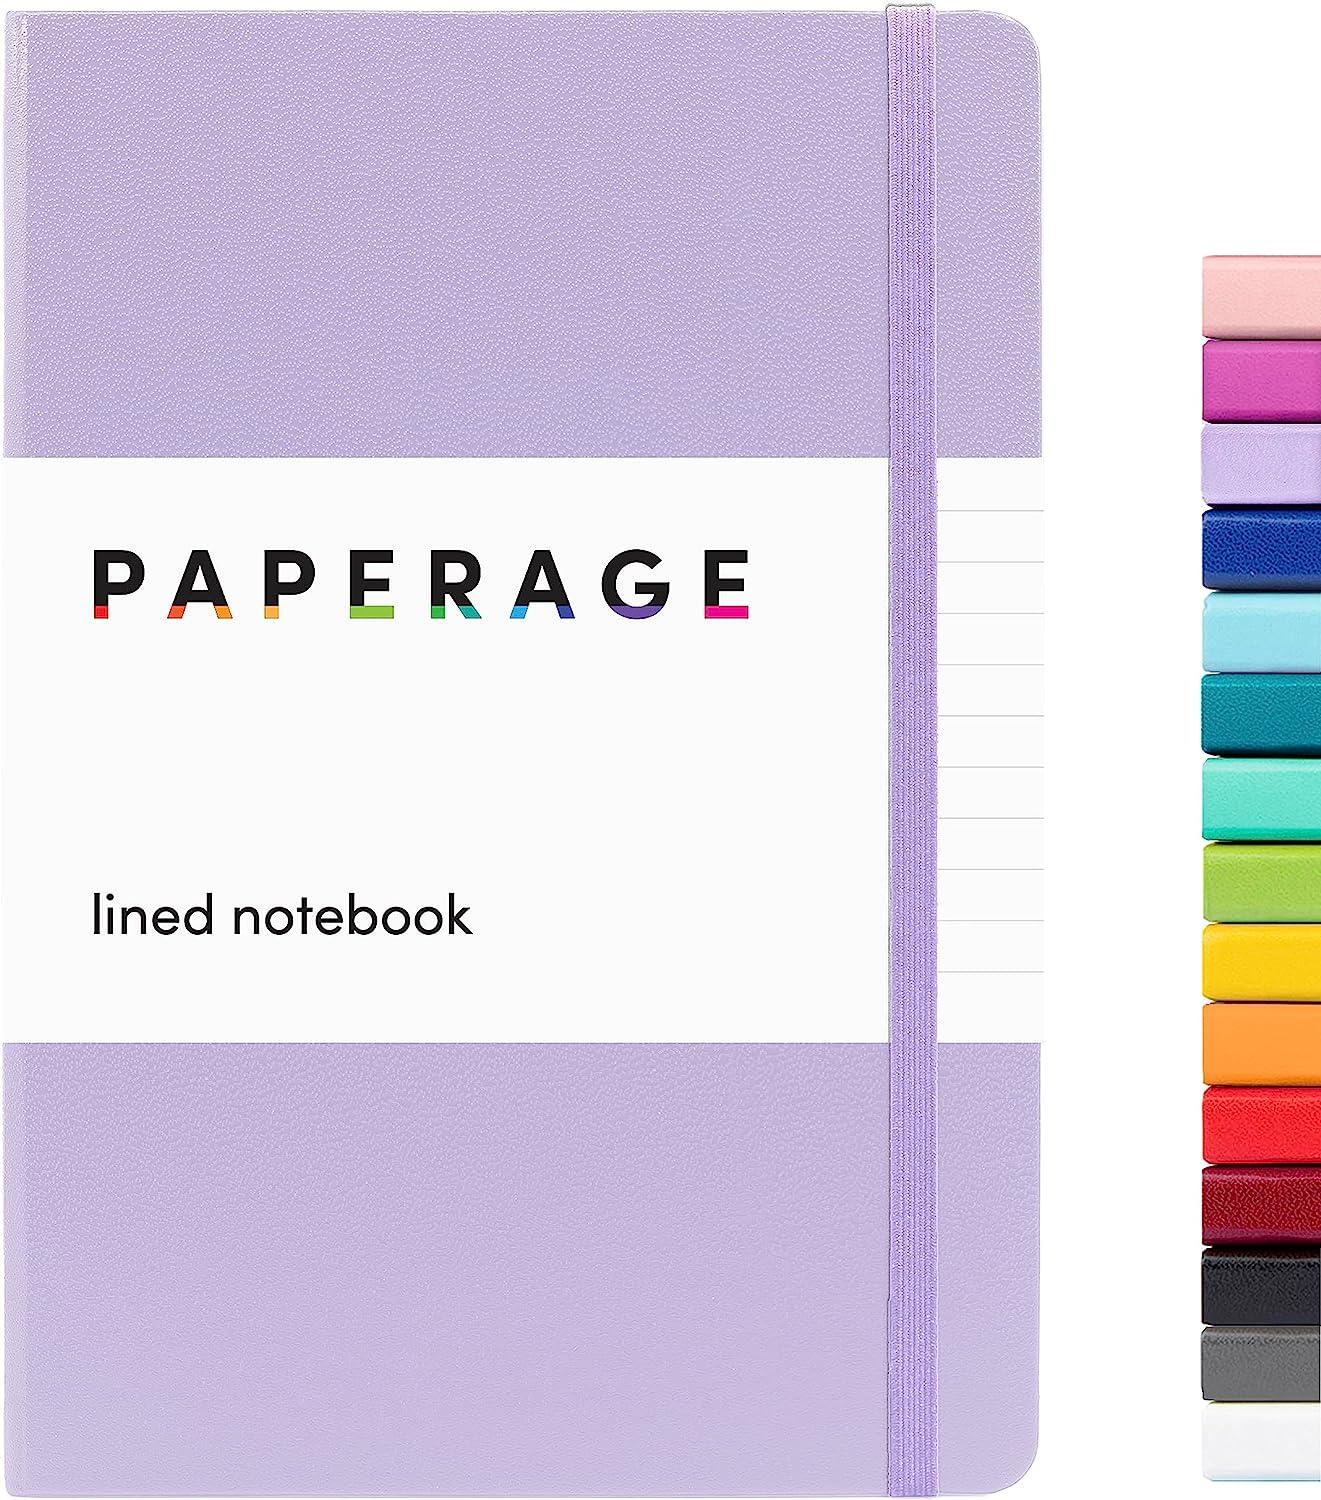 paperage lined journal notebook lavender 160 pages medium 5 7 inches x 8 inches - 100 gsm thick paper 